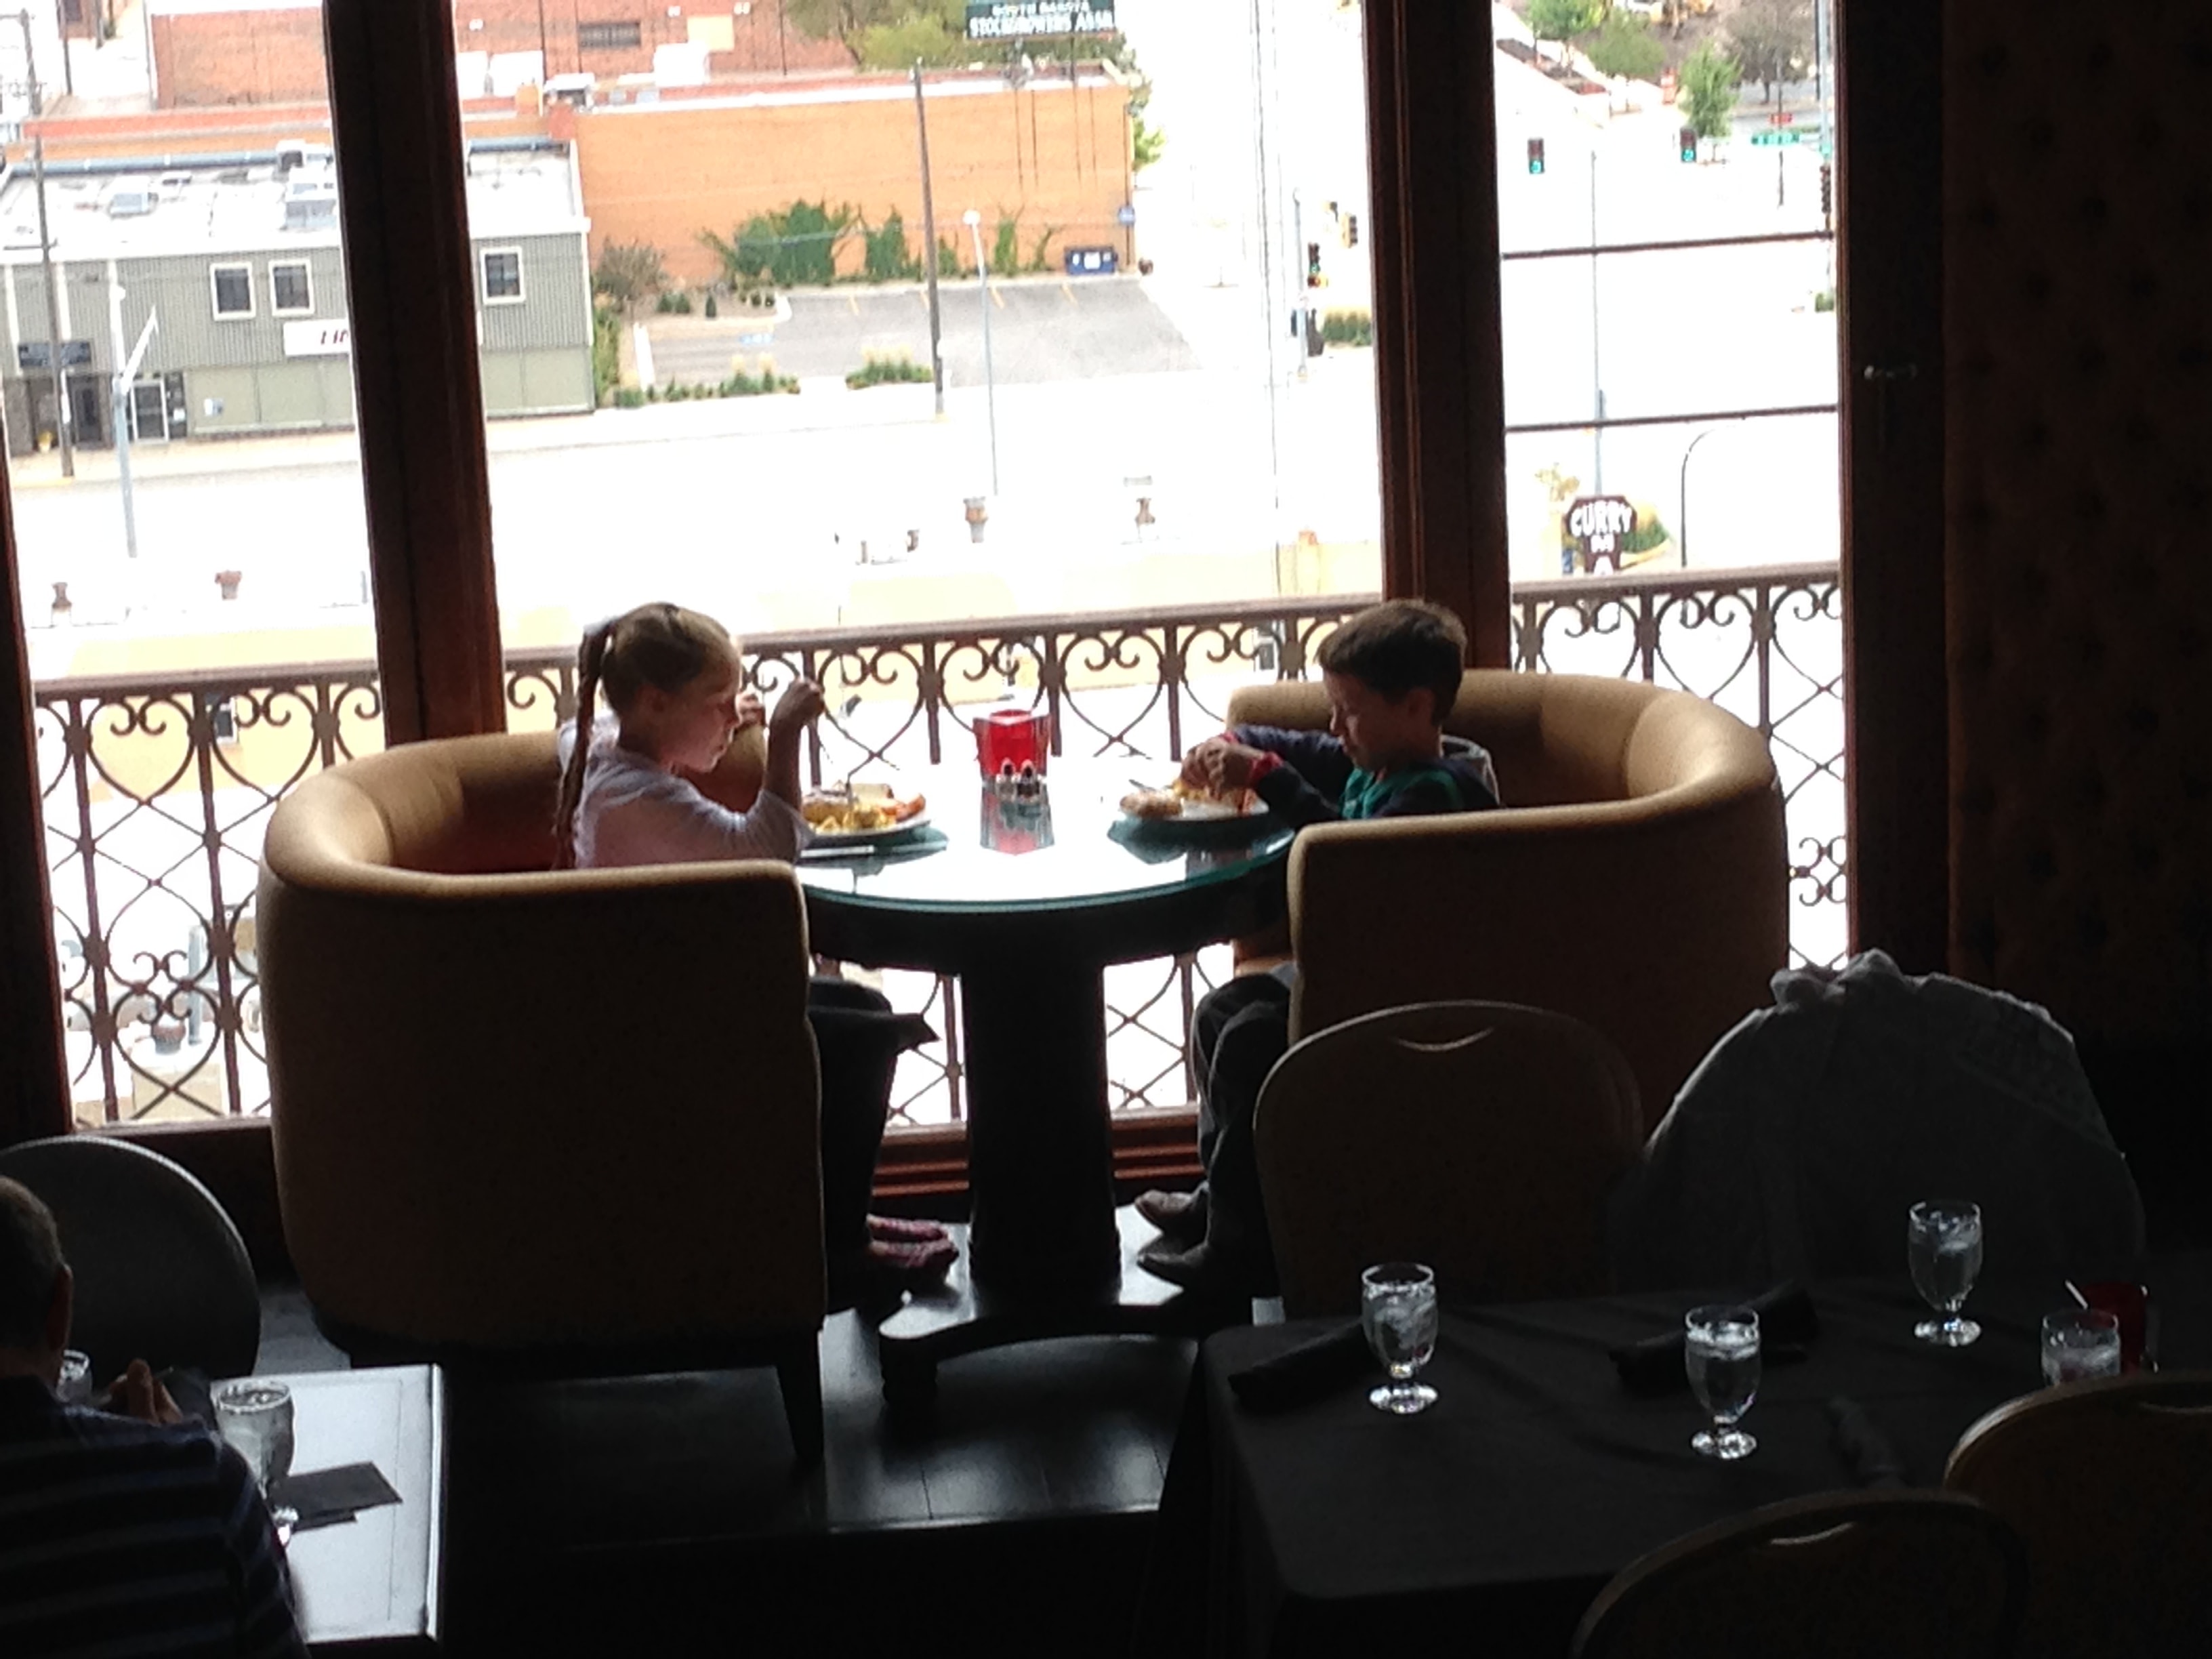 Children enjoying brunch in front of a beautiful window at a local restaurant.